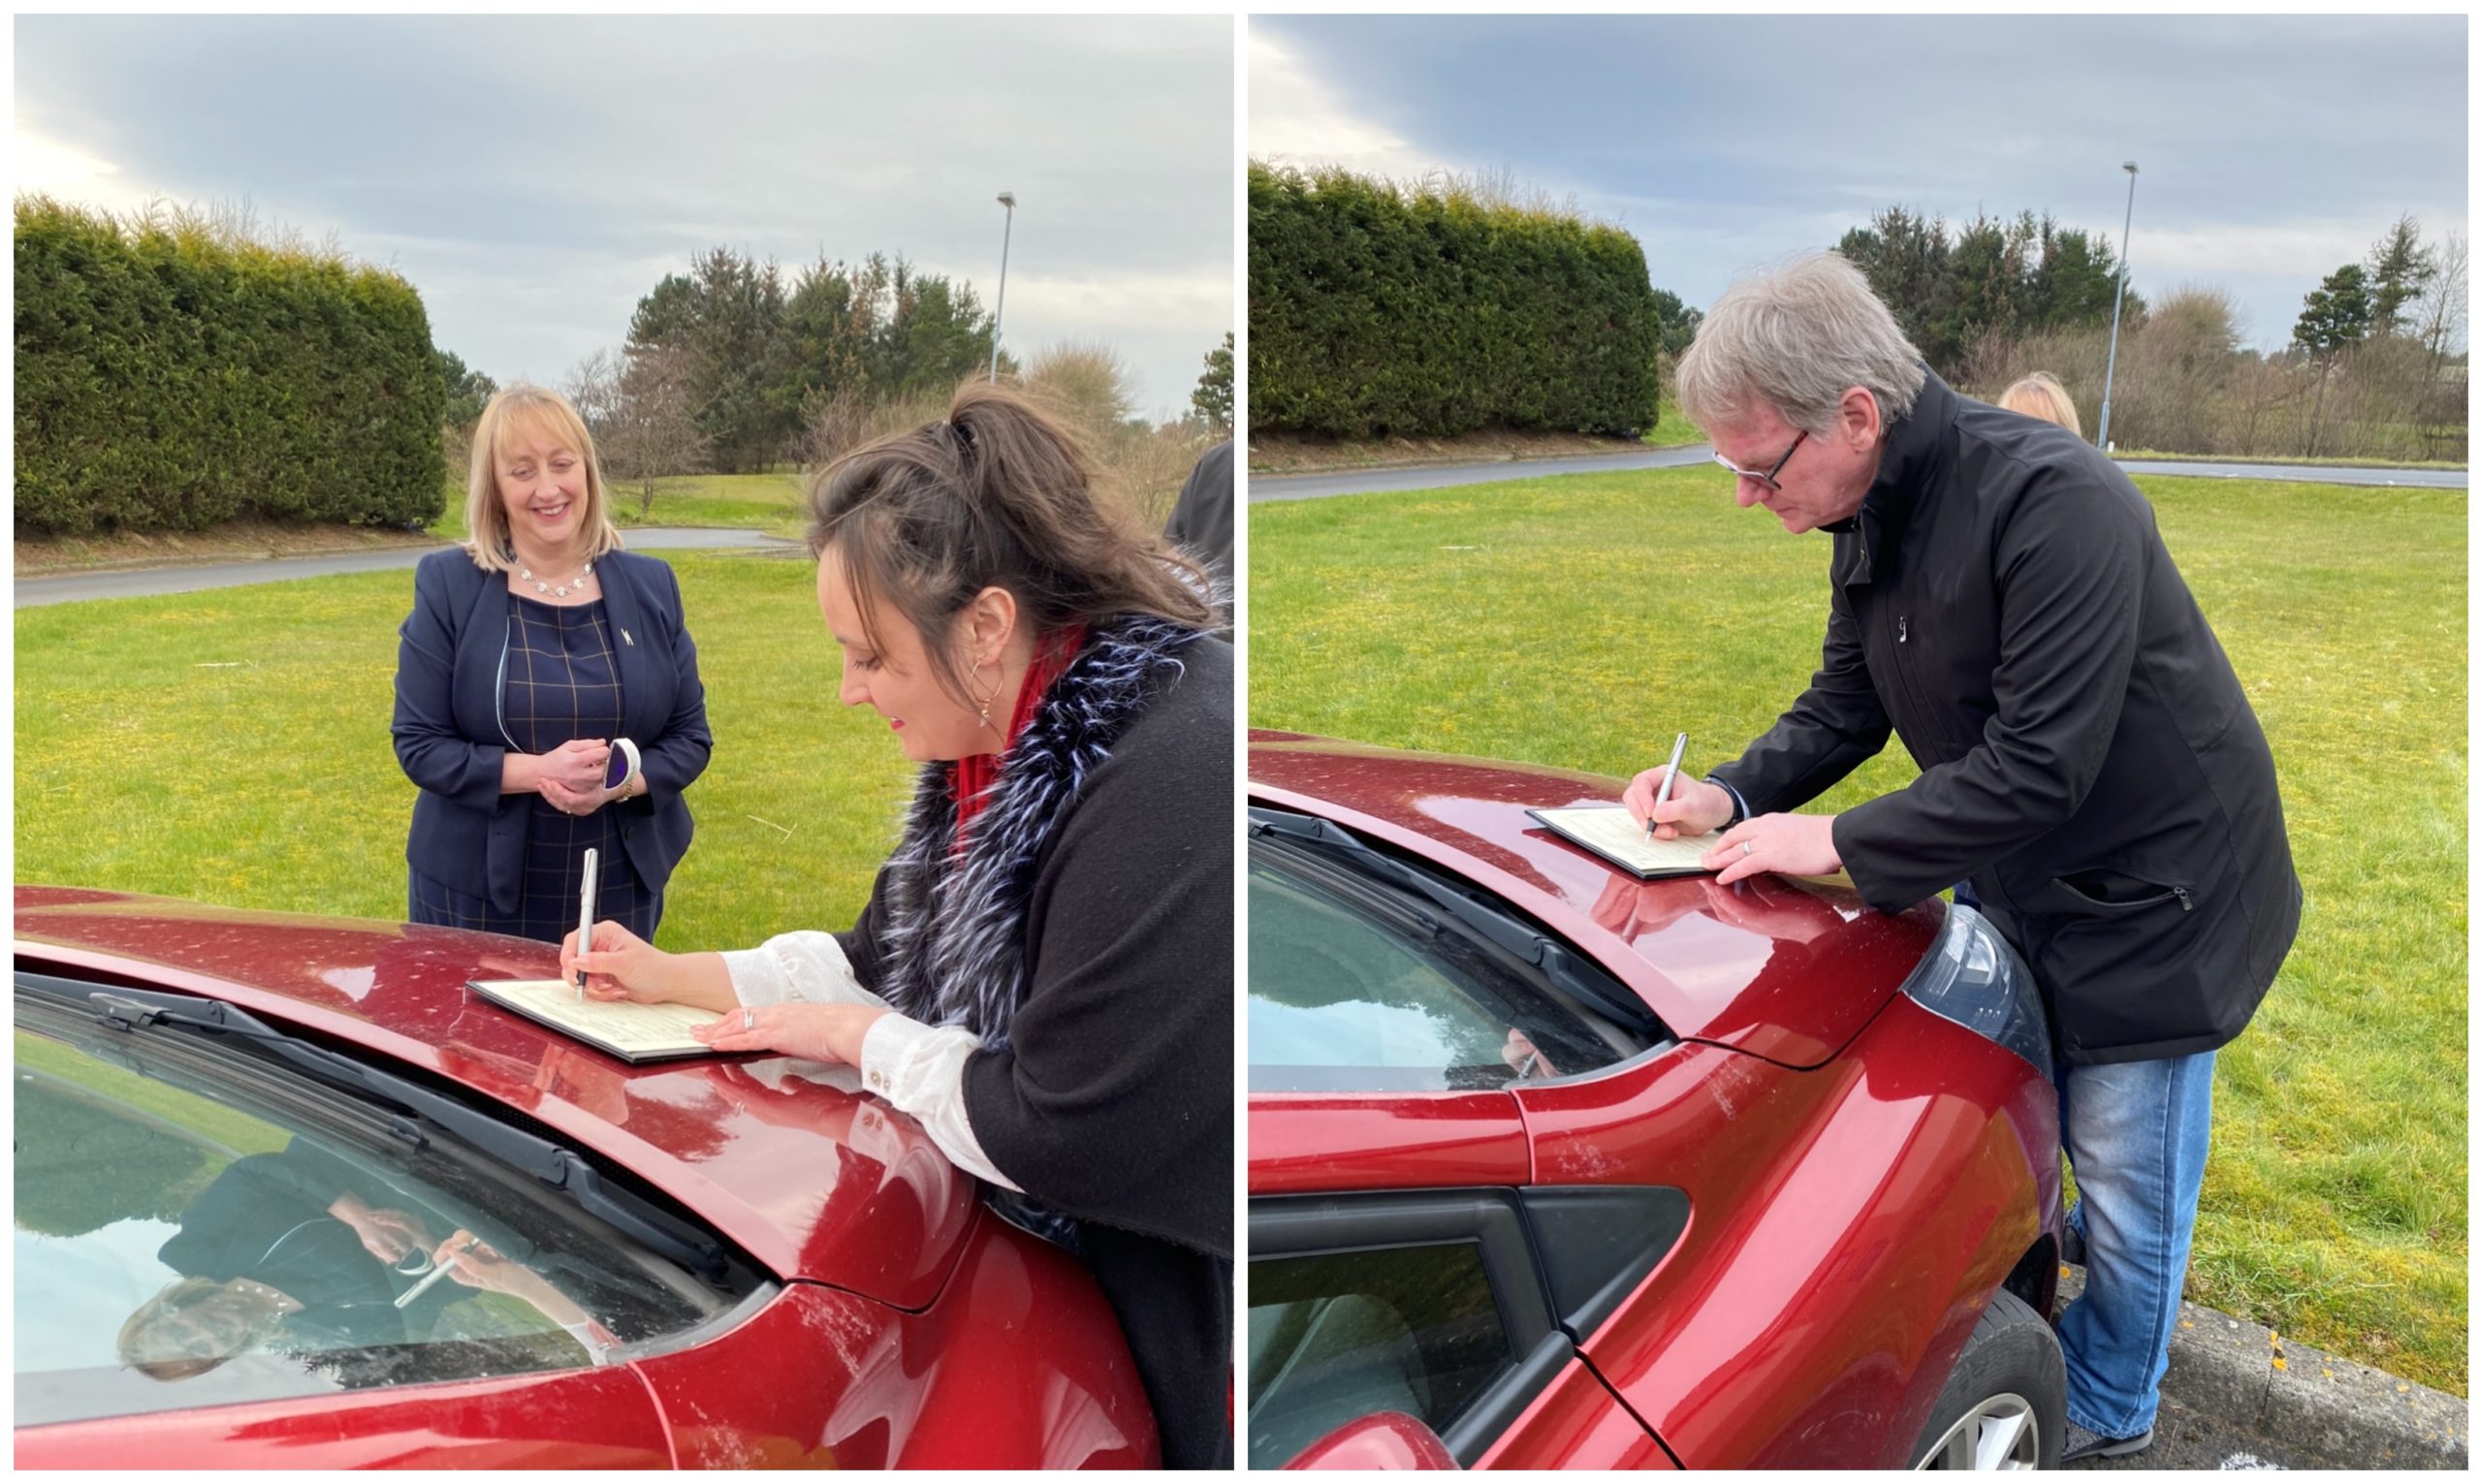 Wedding bonnet: First, Joanna makes it official on mum’s car...  Then husband Steve signs the wedding documents in most unusual circumstances